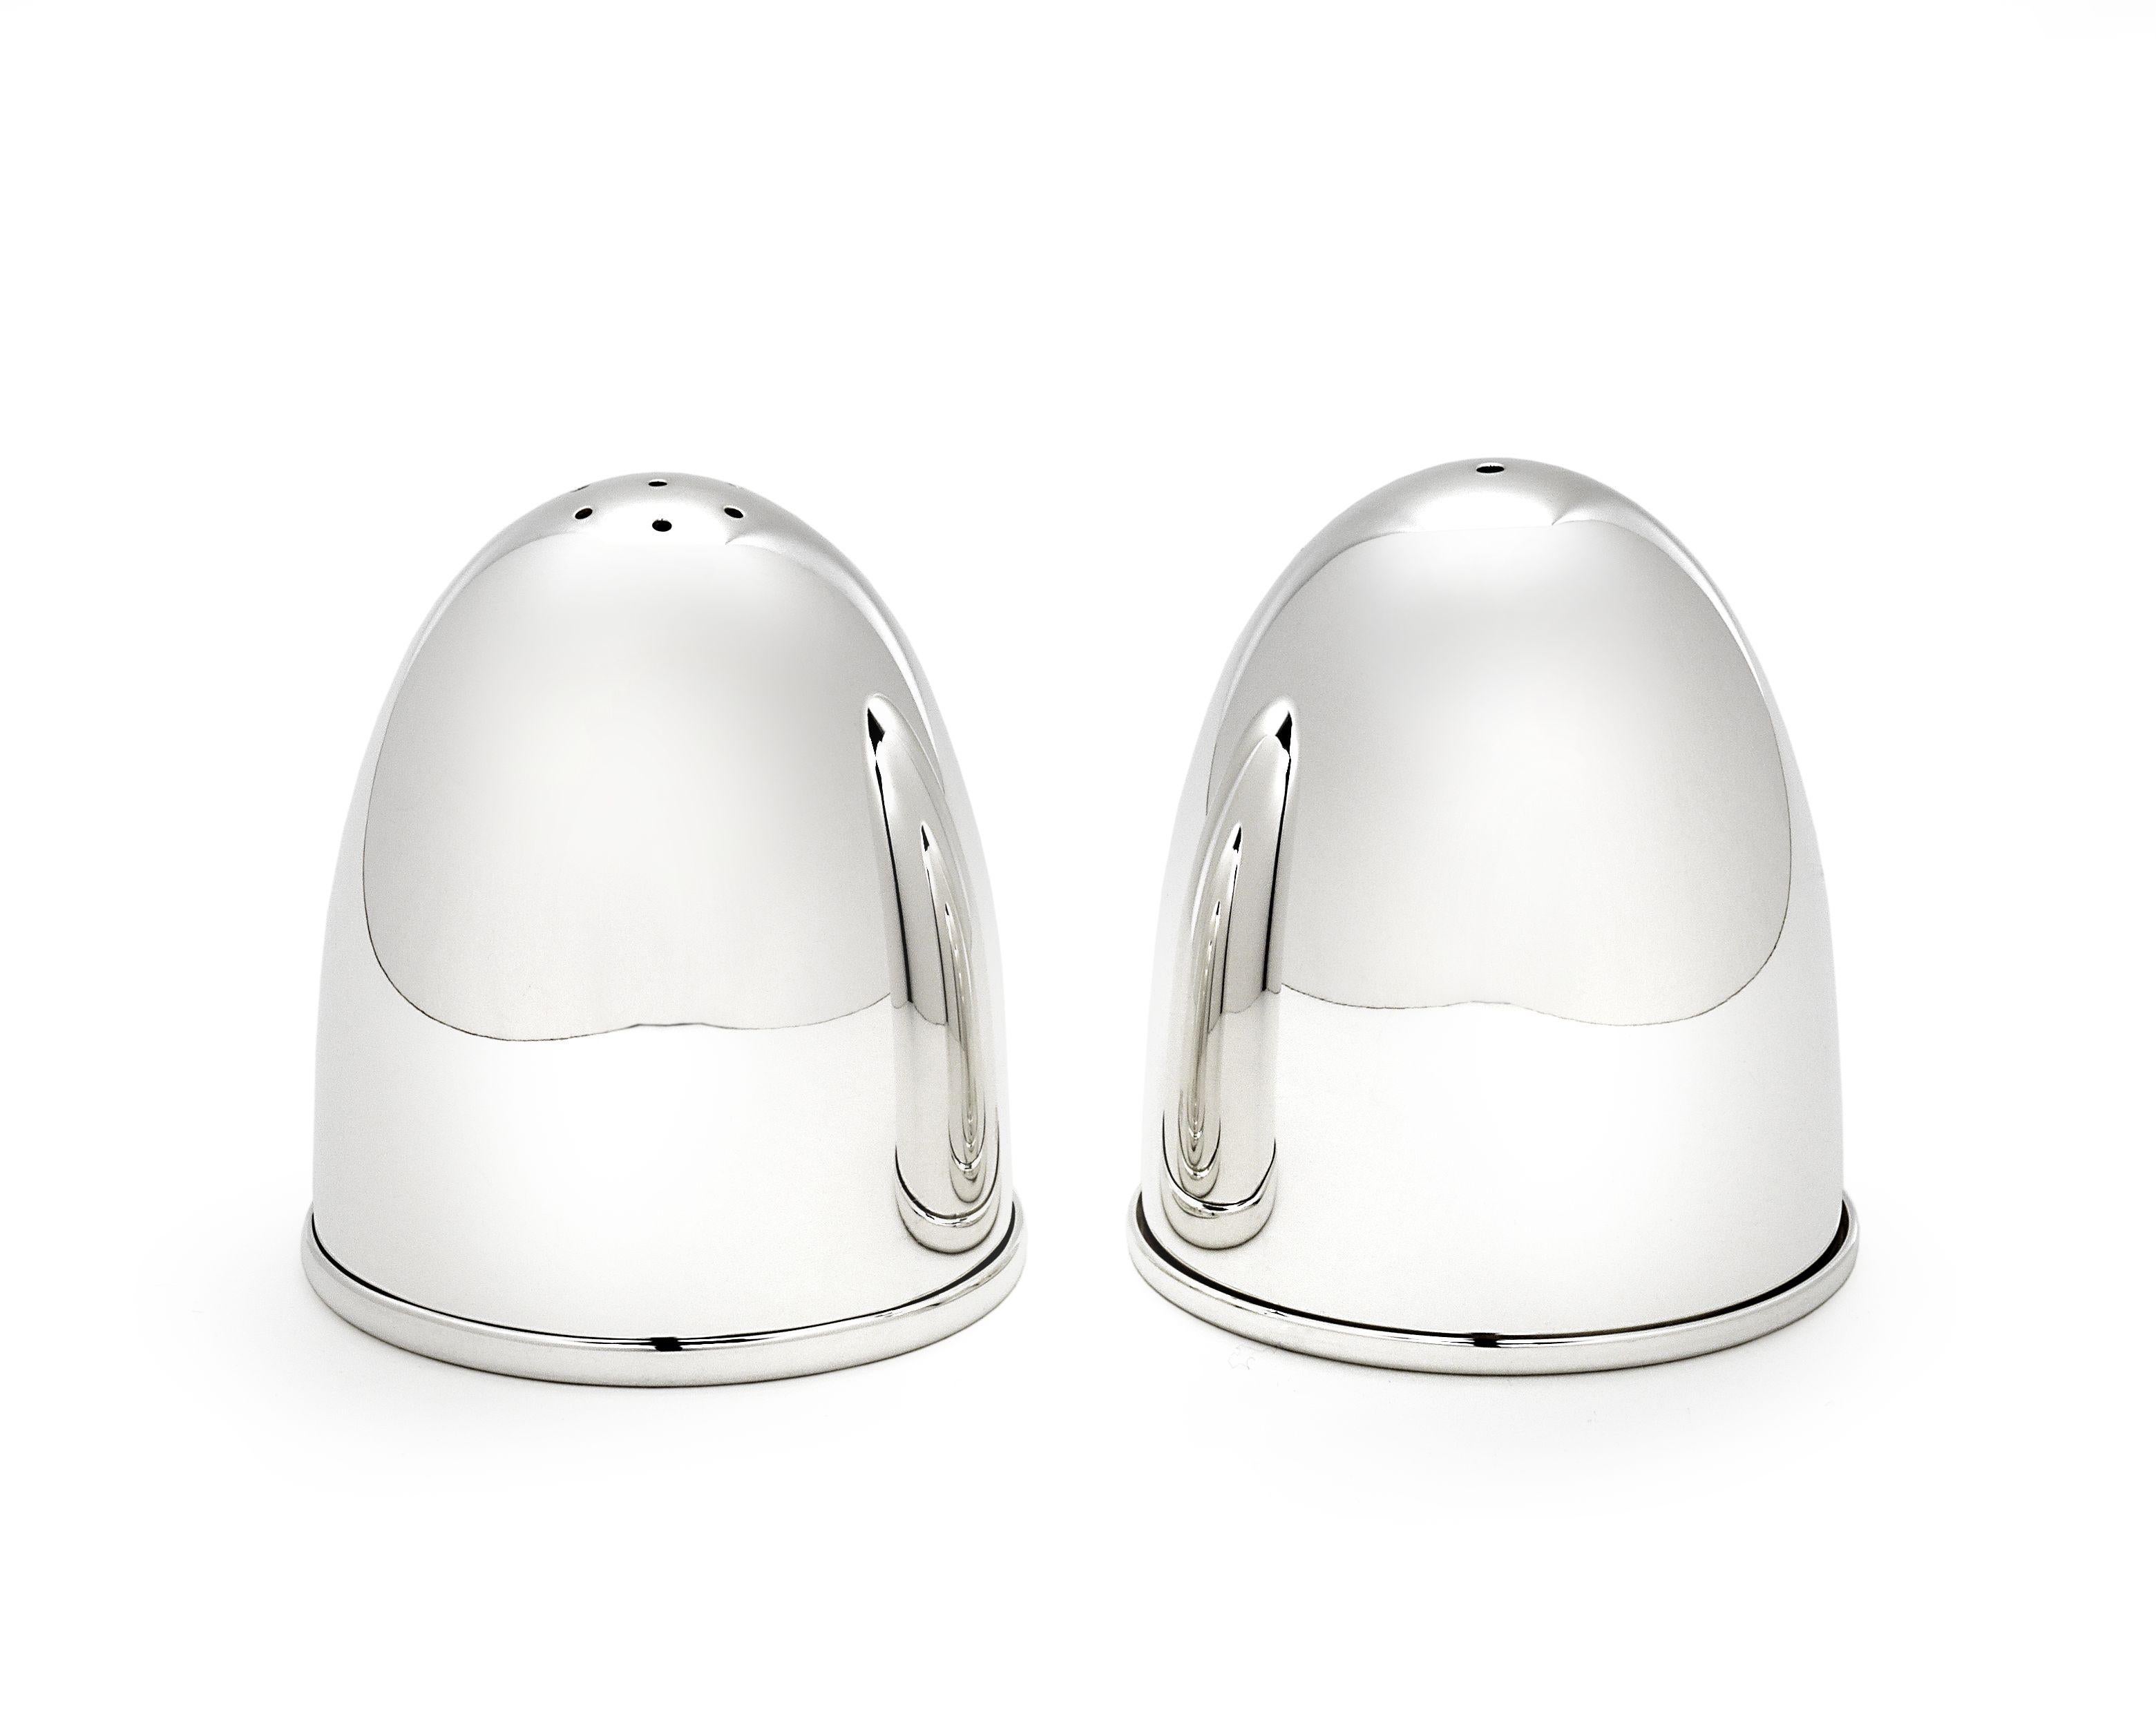 Egg salt and pepper in solid silver by Wiener Silber. Wiener Silber manufacture uses a special alloy that contains 94% by mass of silver (Sterling silver, by comparison, only contains 92. 5% of silver). The high value of raw materials ensures that